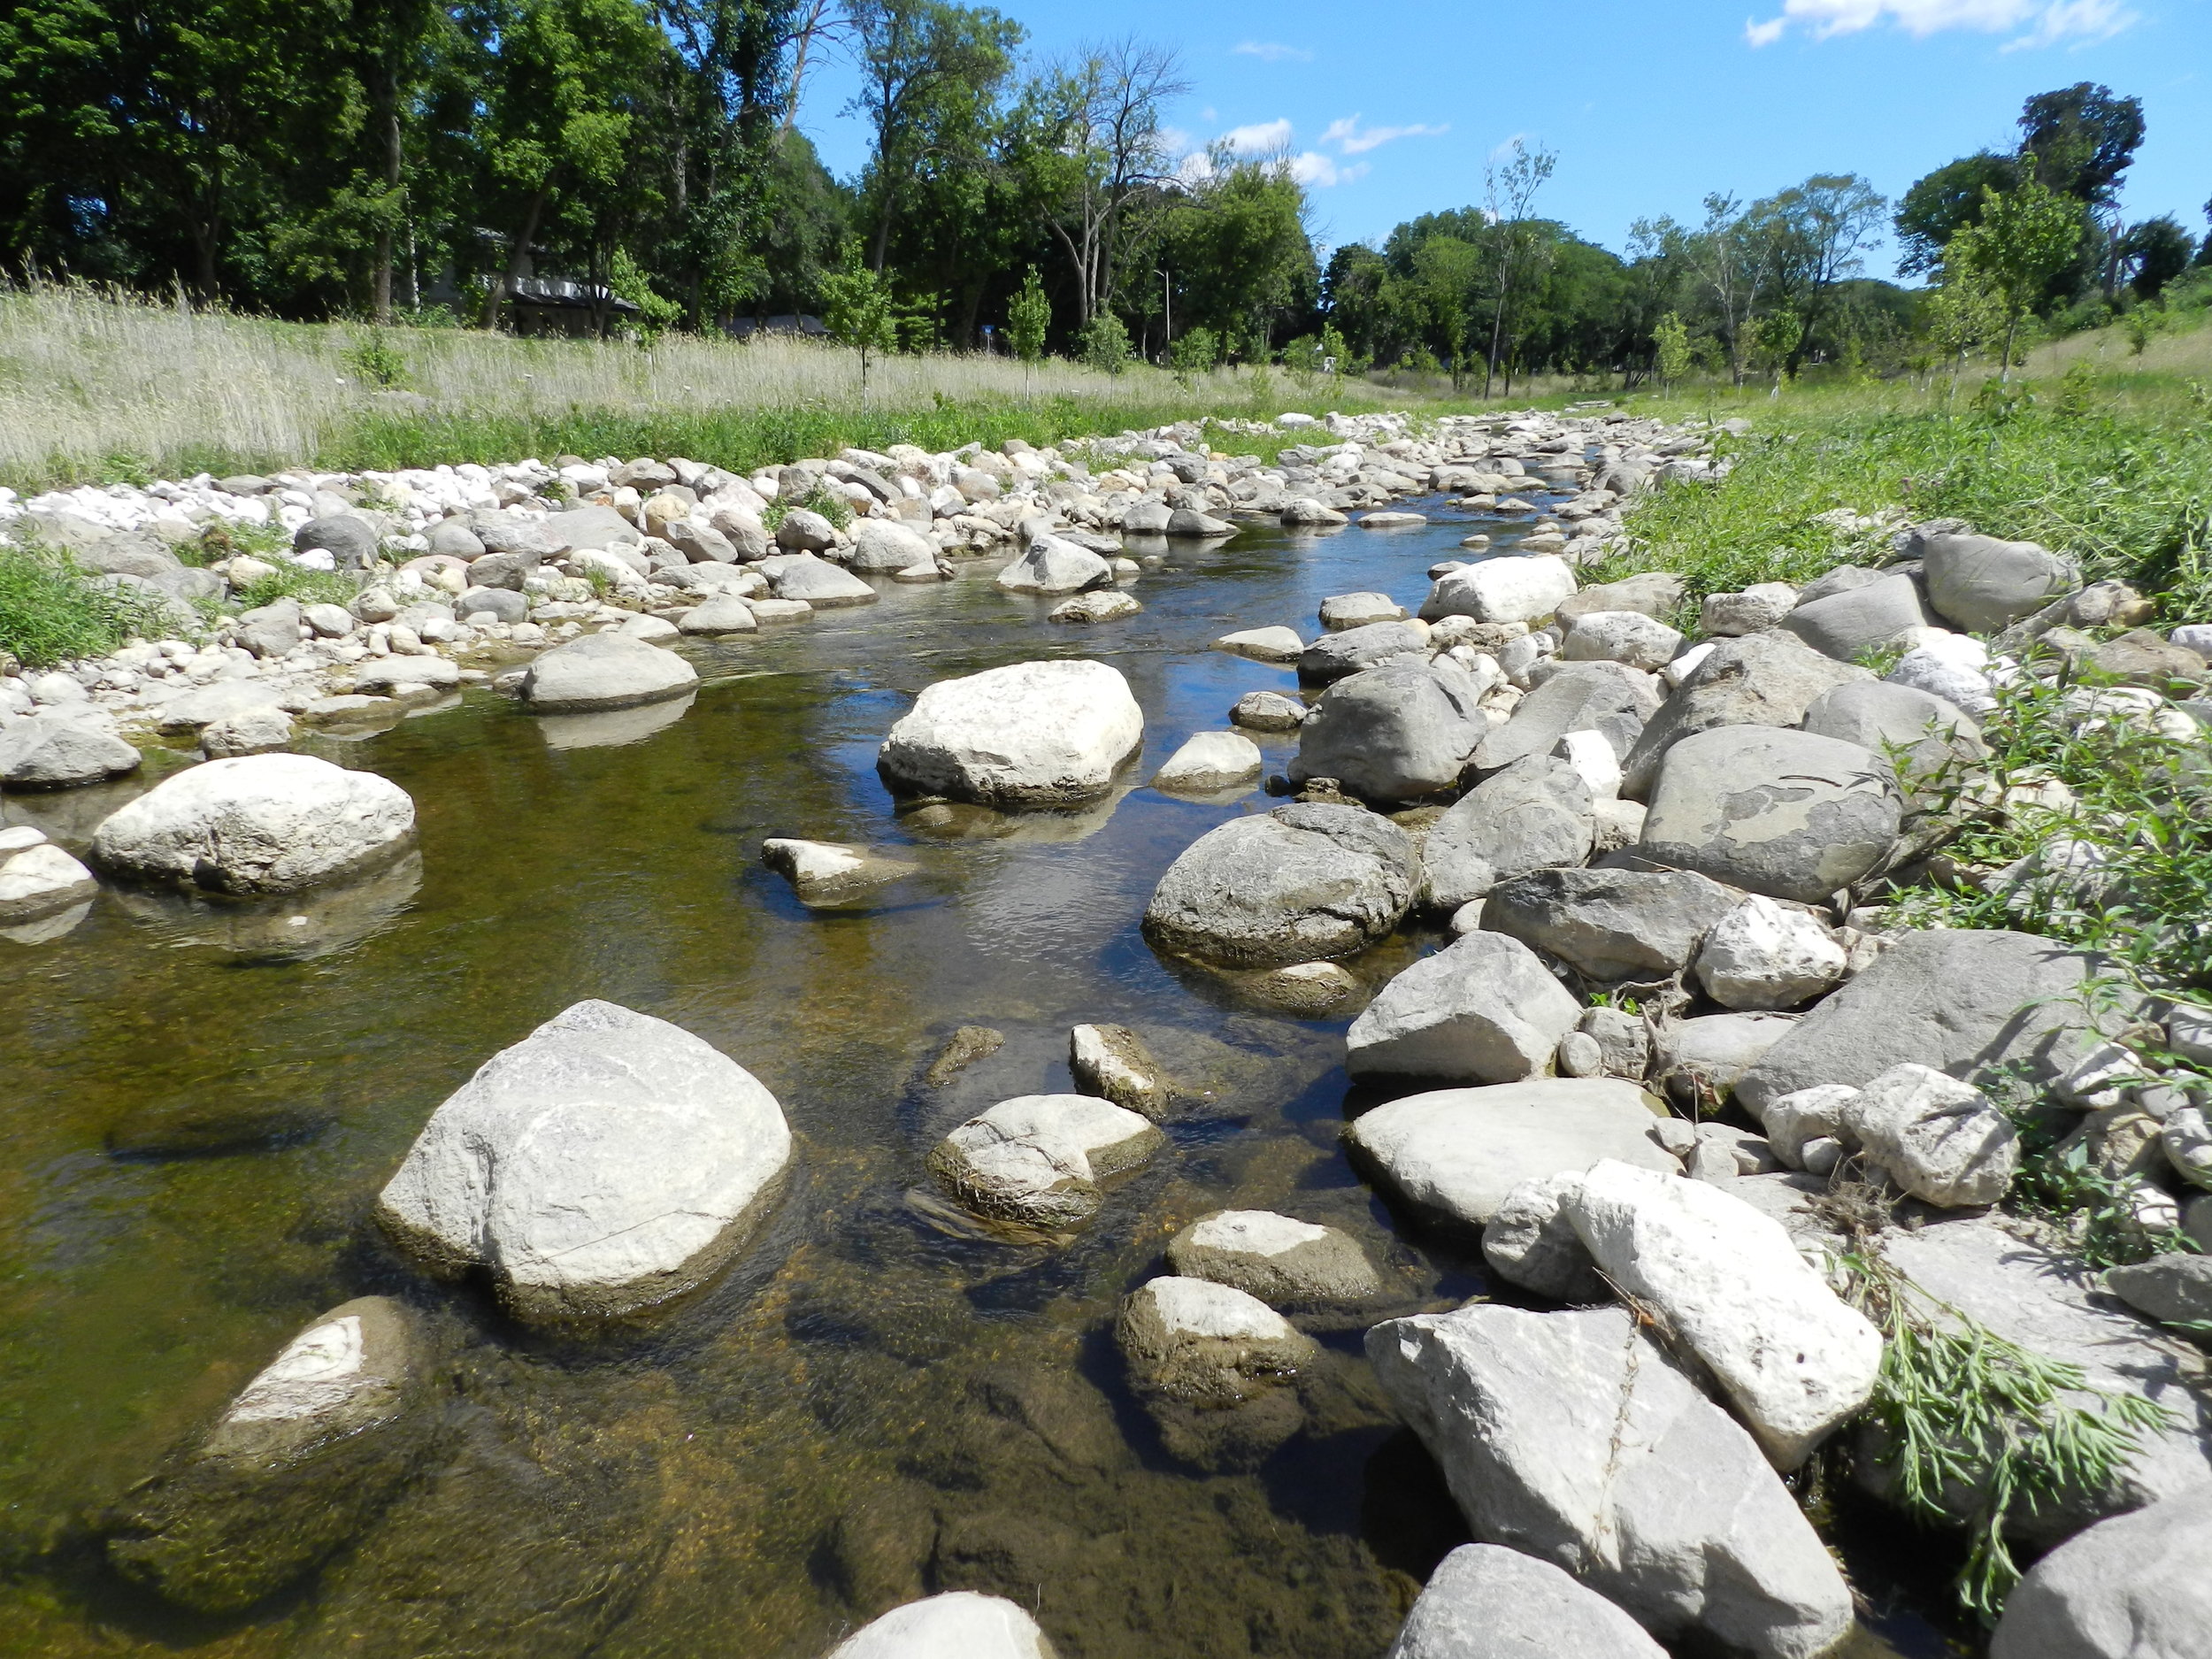 Boulders can be stable features that create habitat structure